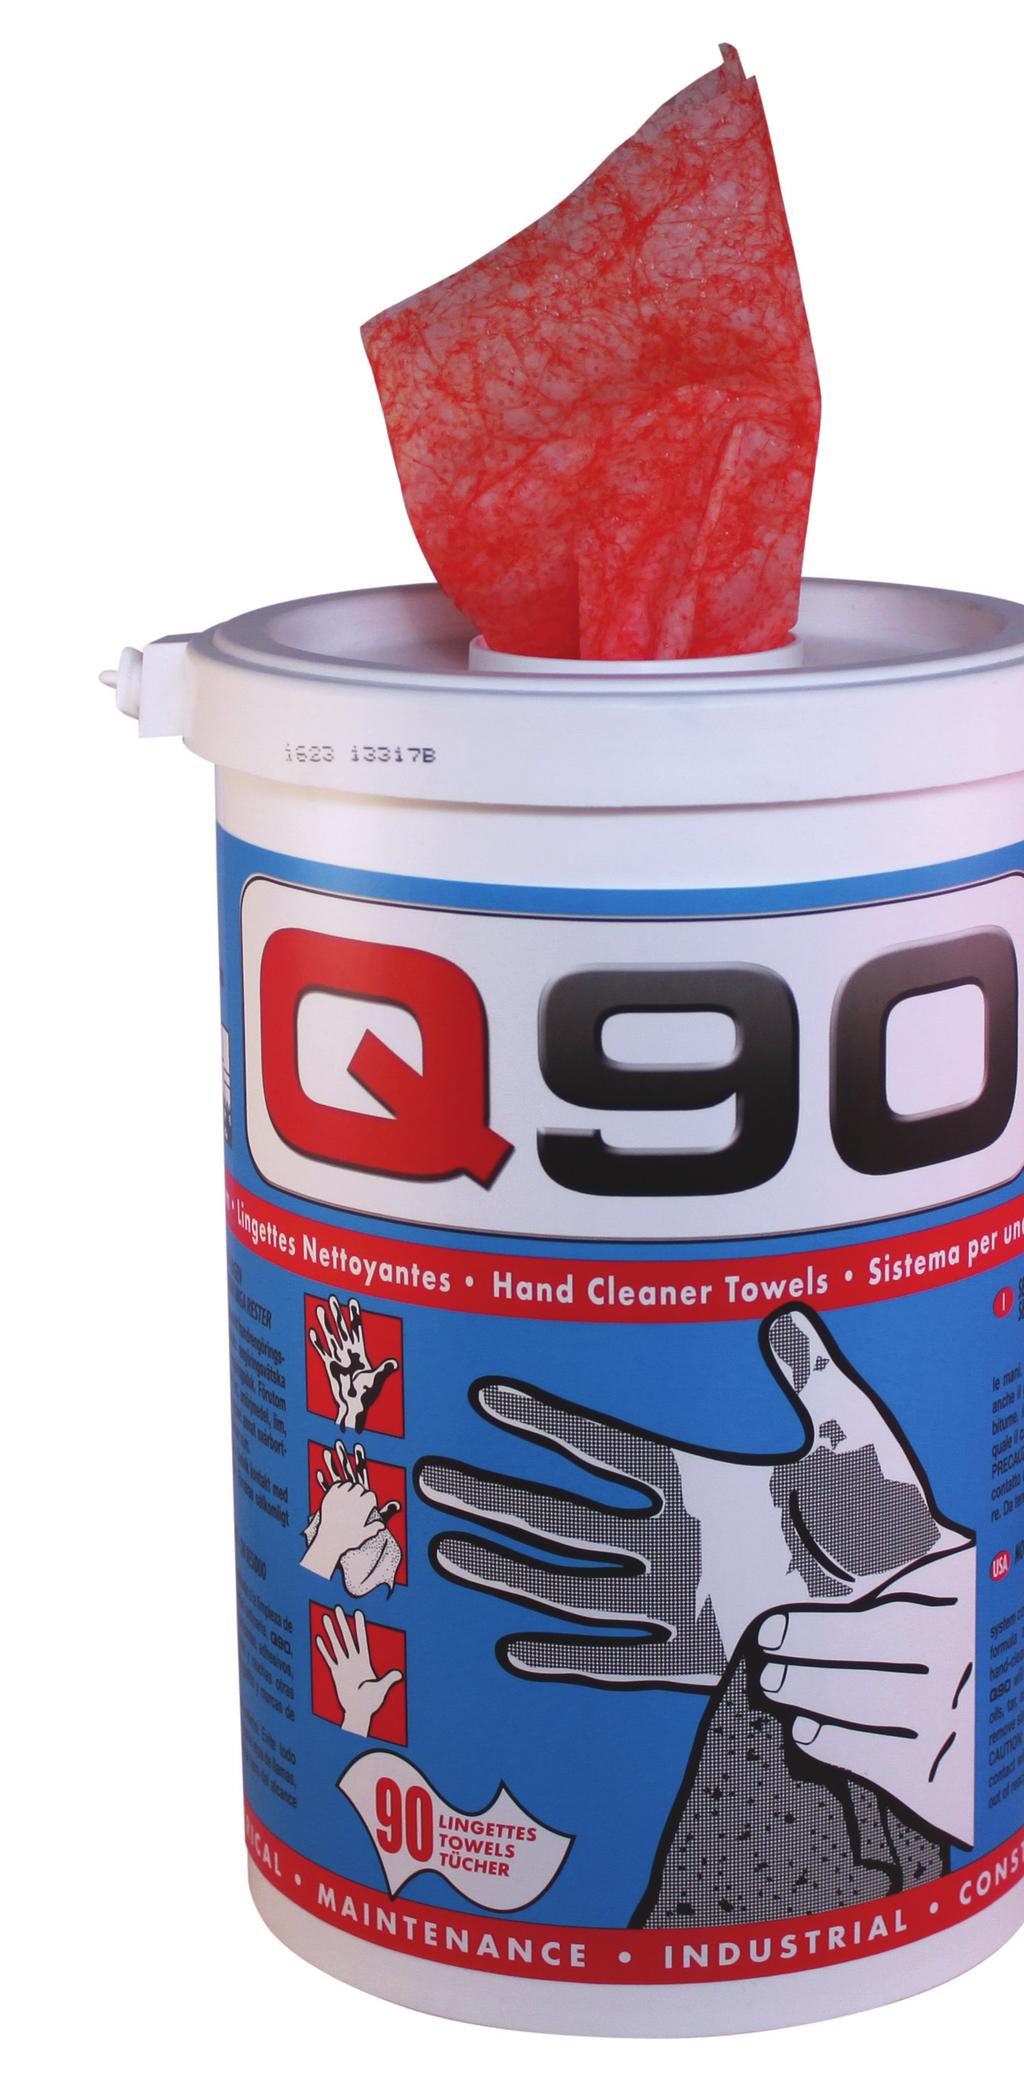 90 no water no soap no residue industrial strength hand wipes Removes oil, grease, wet paint, printing ink & bitumen can also be used on any smooth & nonporous surfaces Product information The